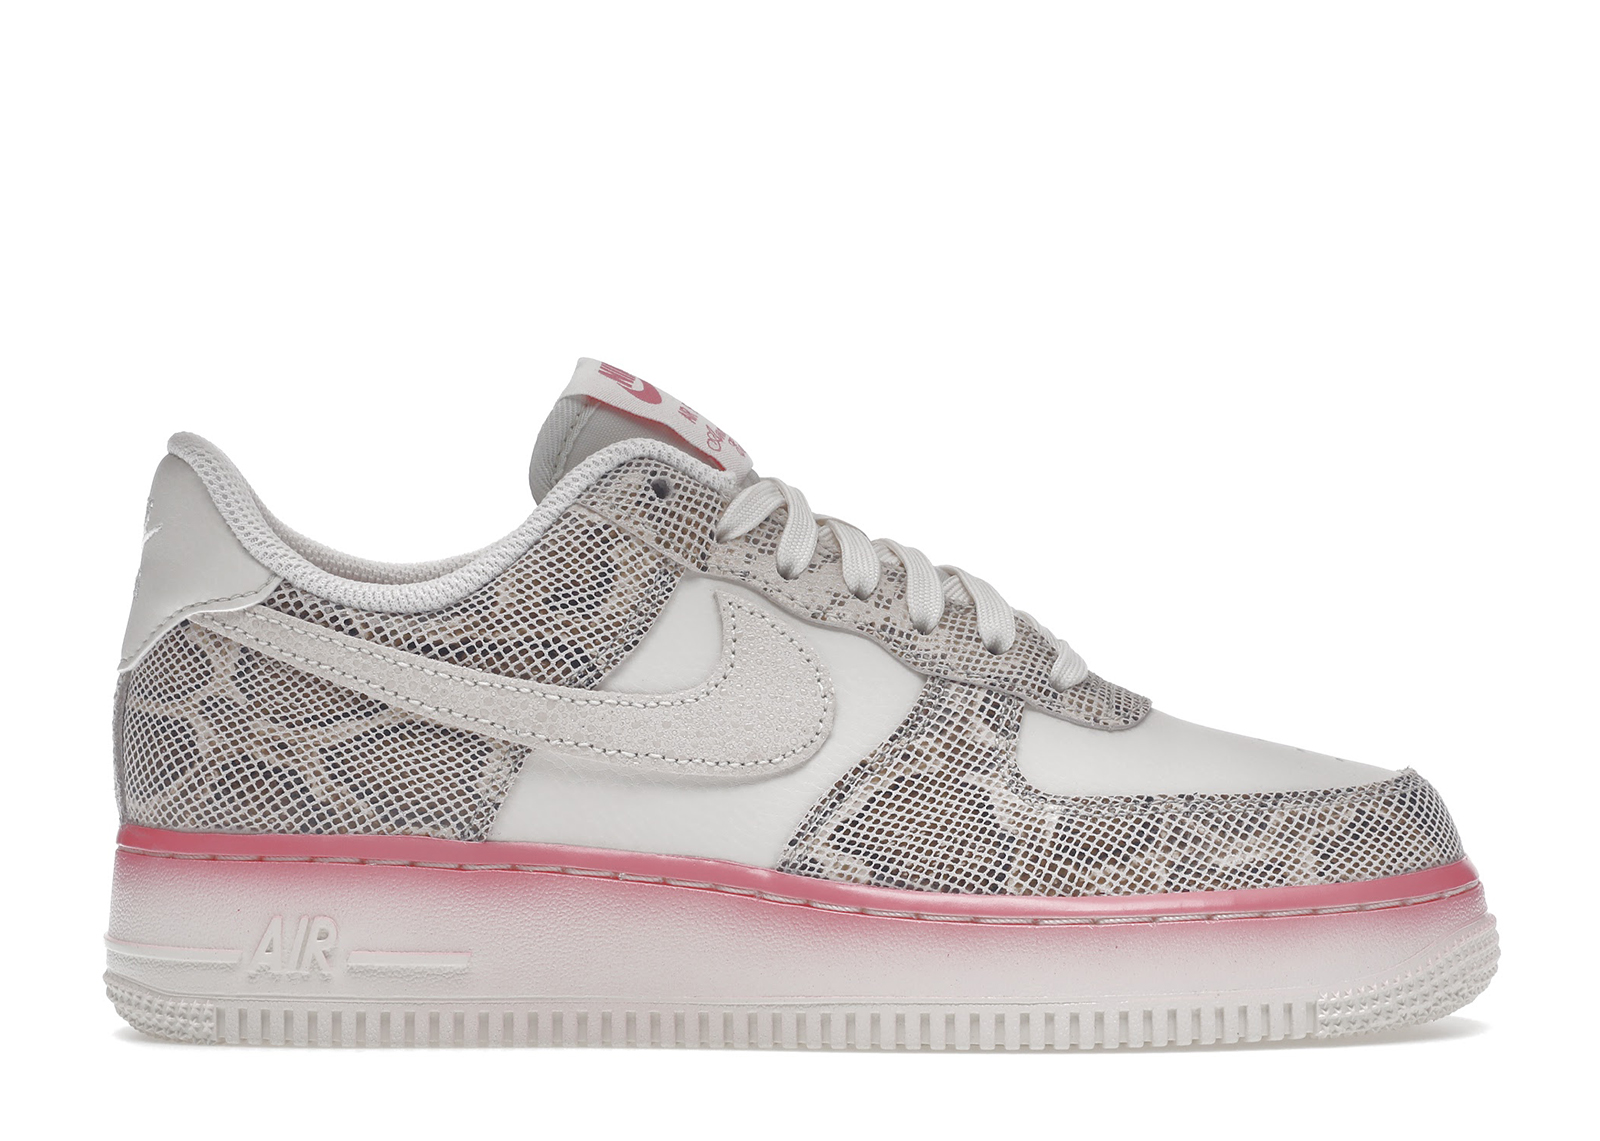 Nike Air Force 1 Low Our Force 1 Snakeskin (Women's)